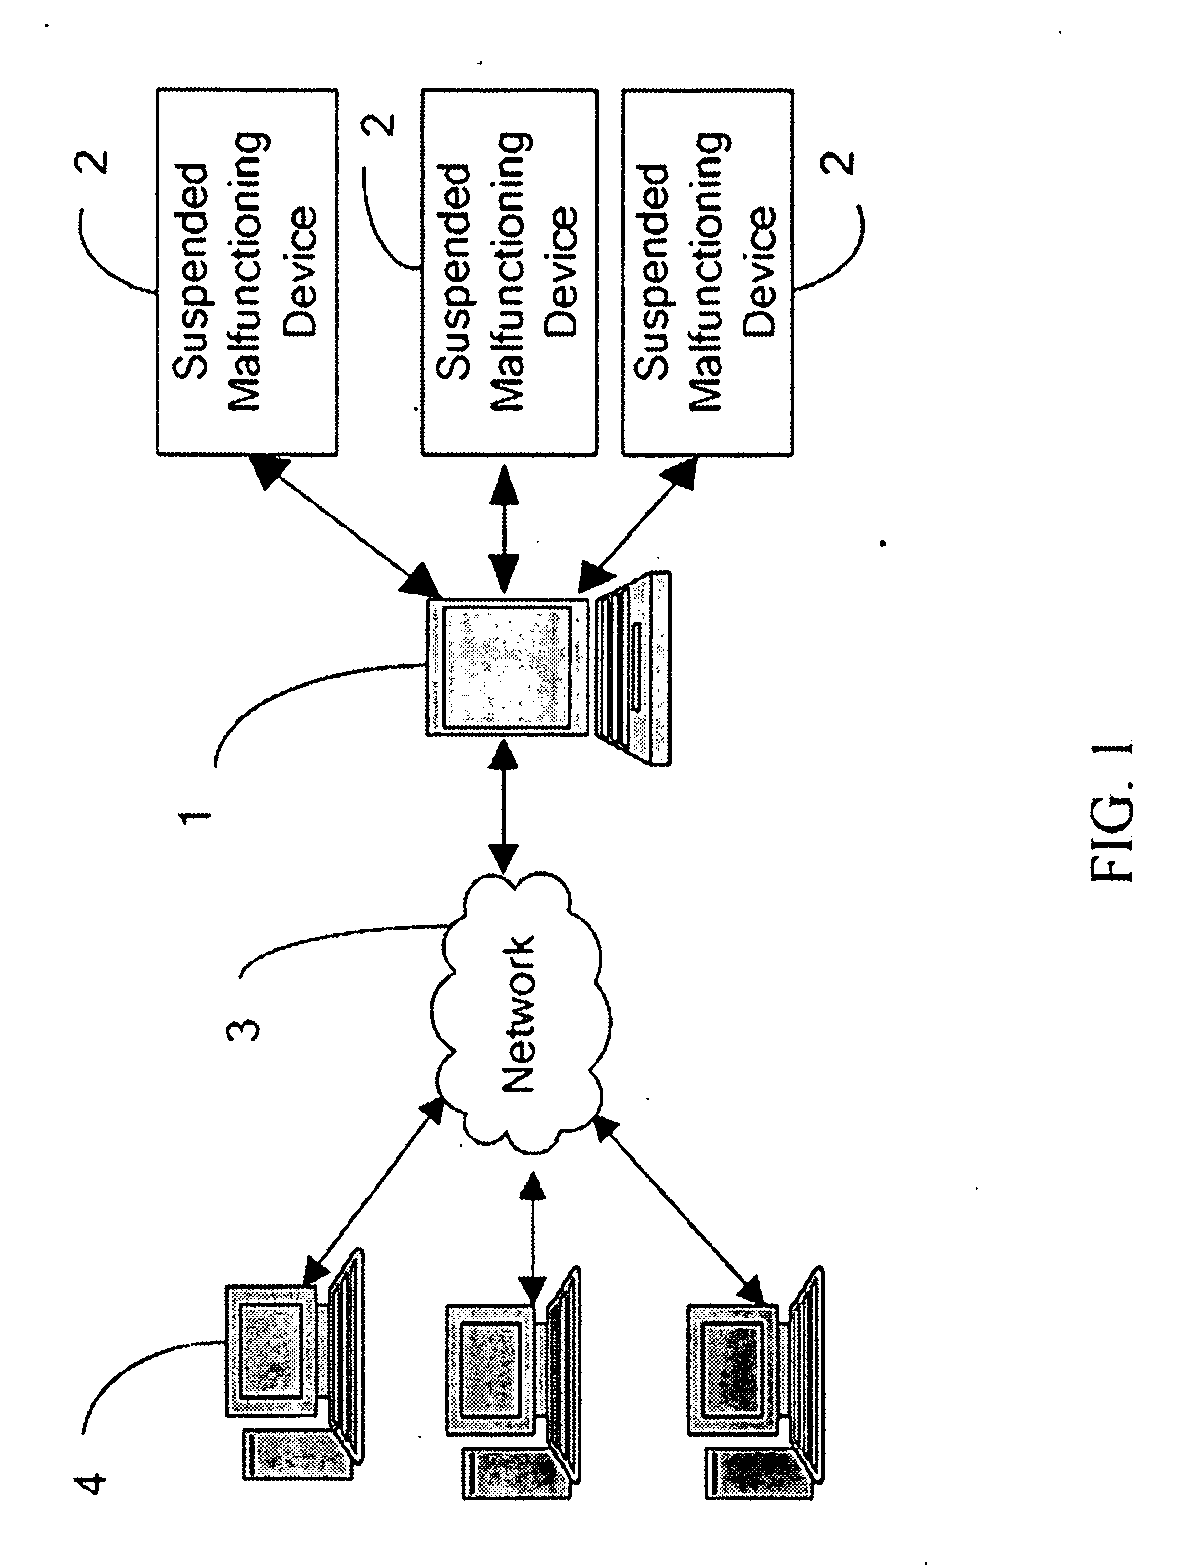 Electronic malfunction diagnostic apparatus and method